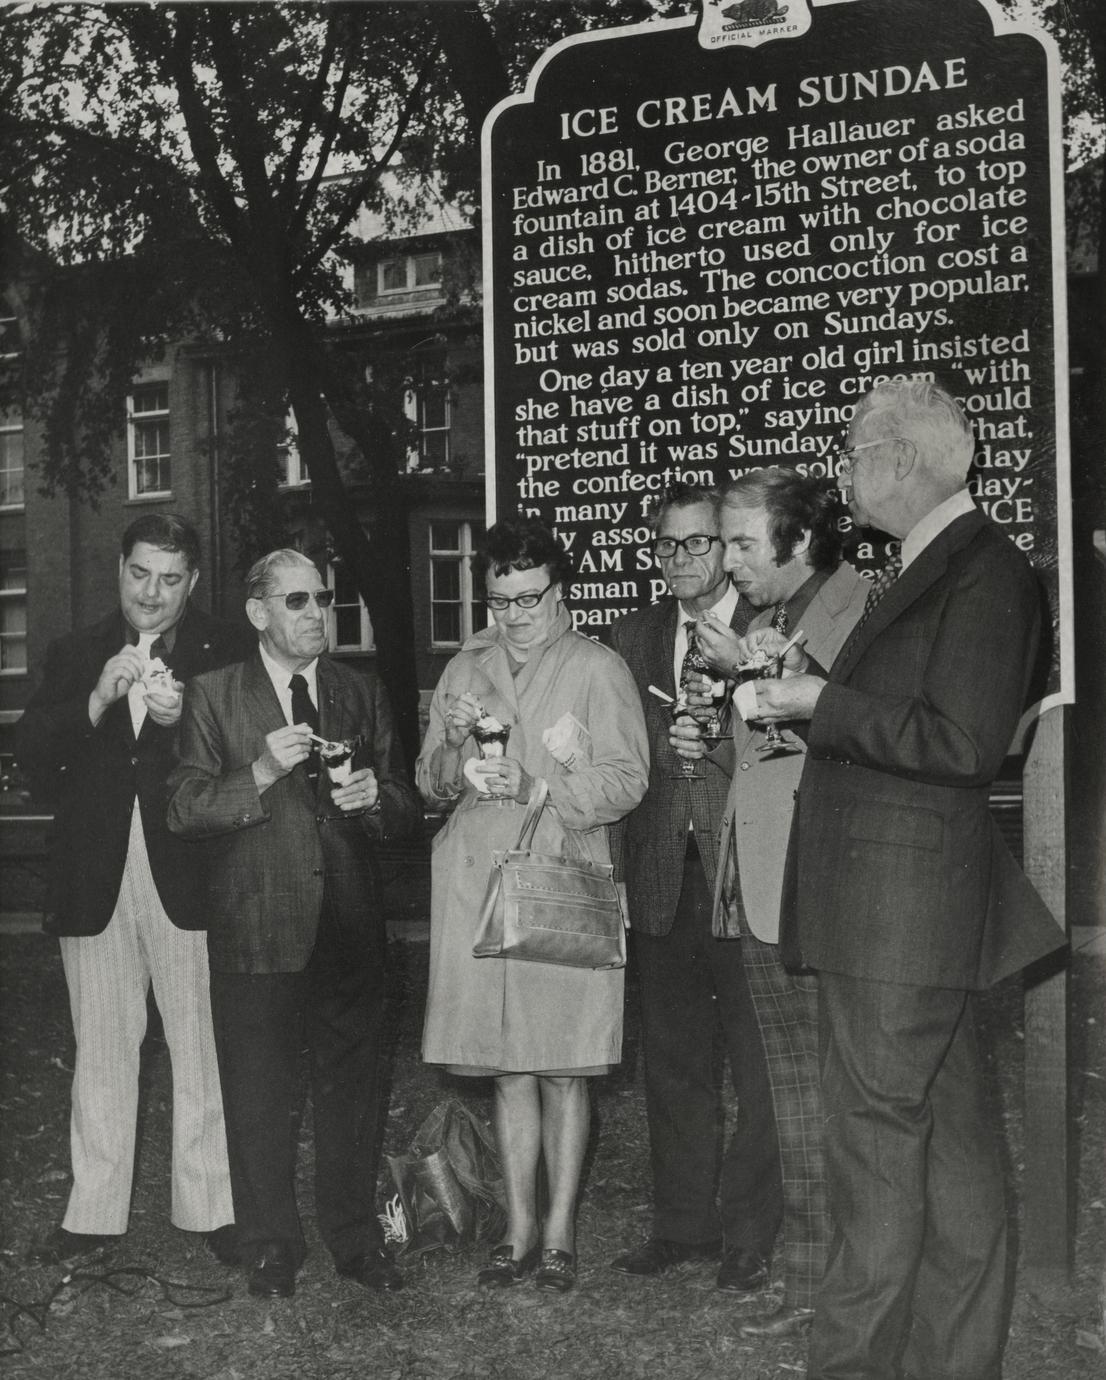 People of Two Rivers standing in front of Ice Cream Sundae historical marker